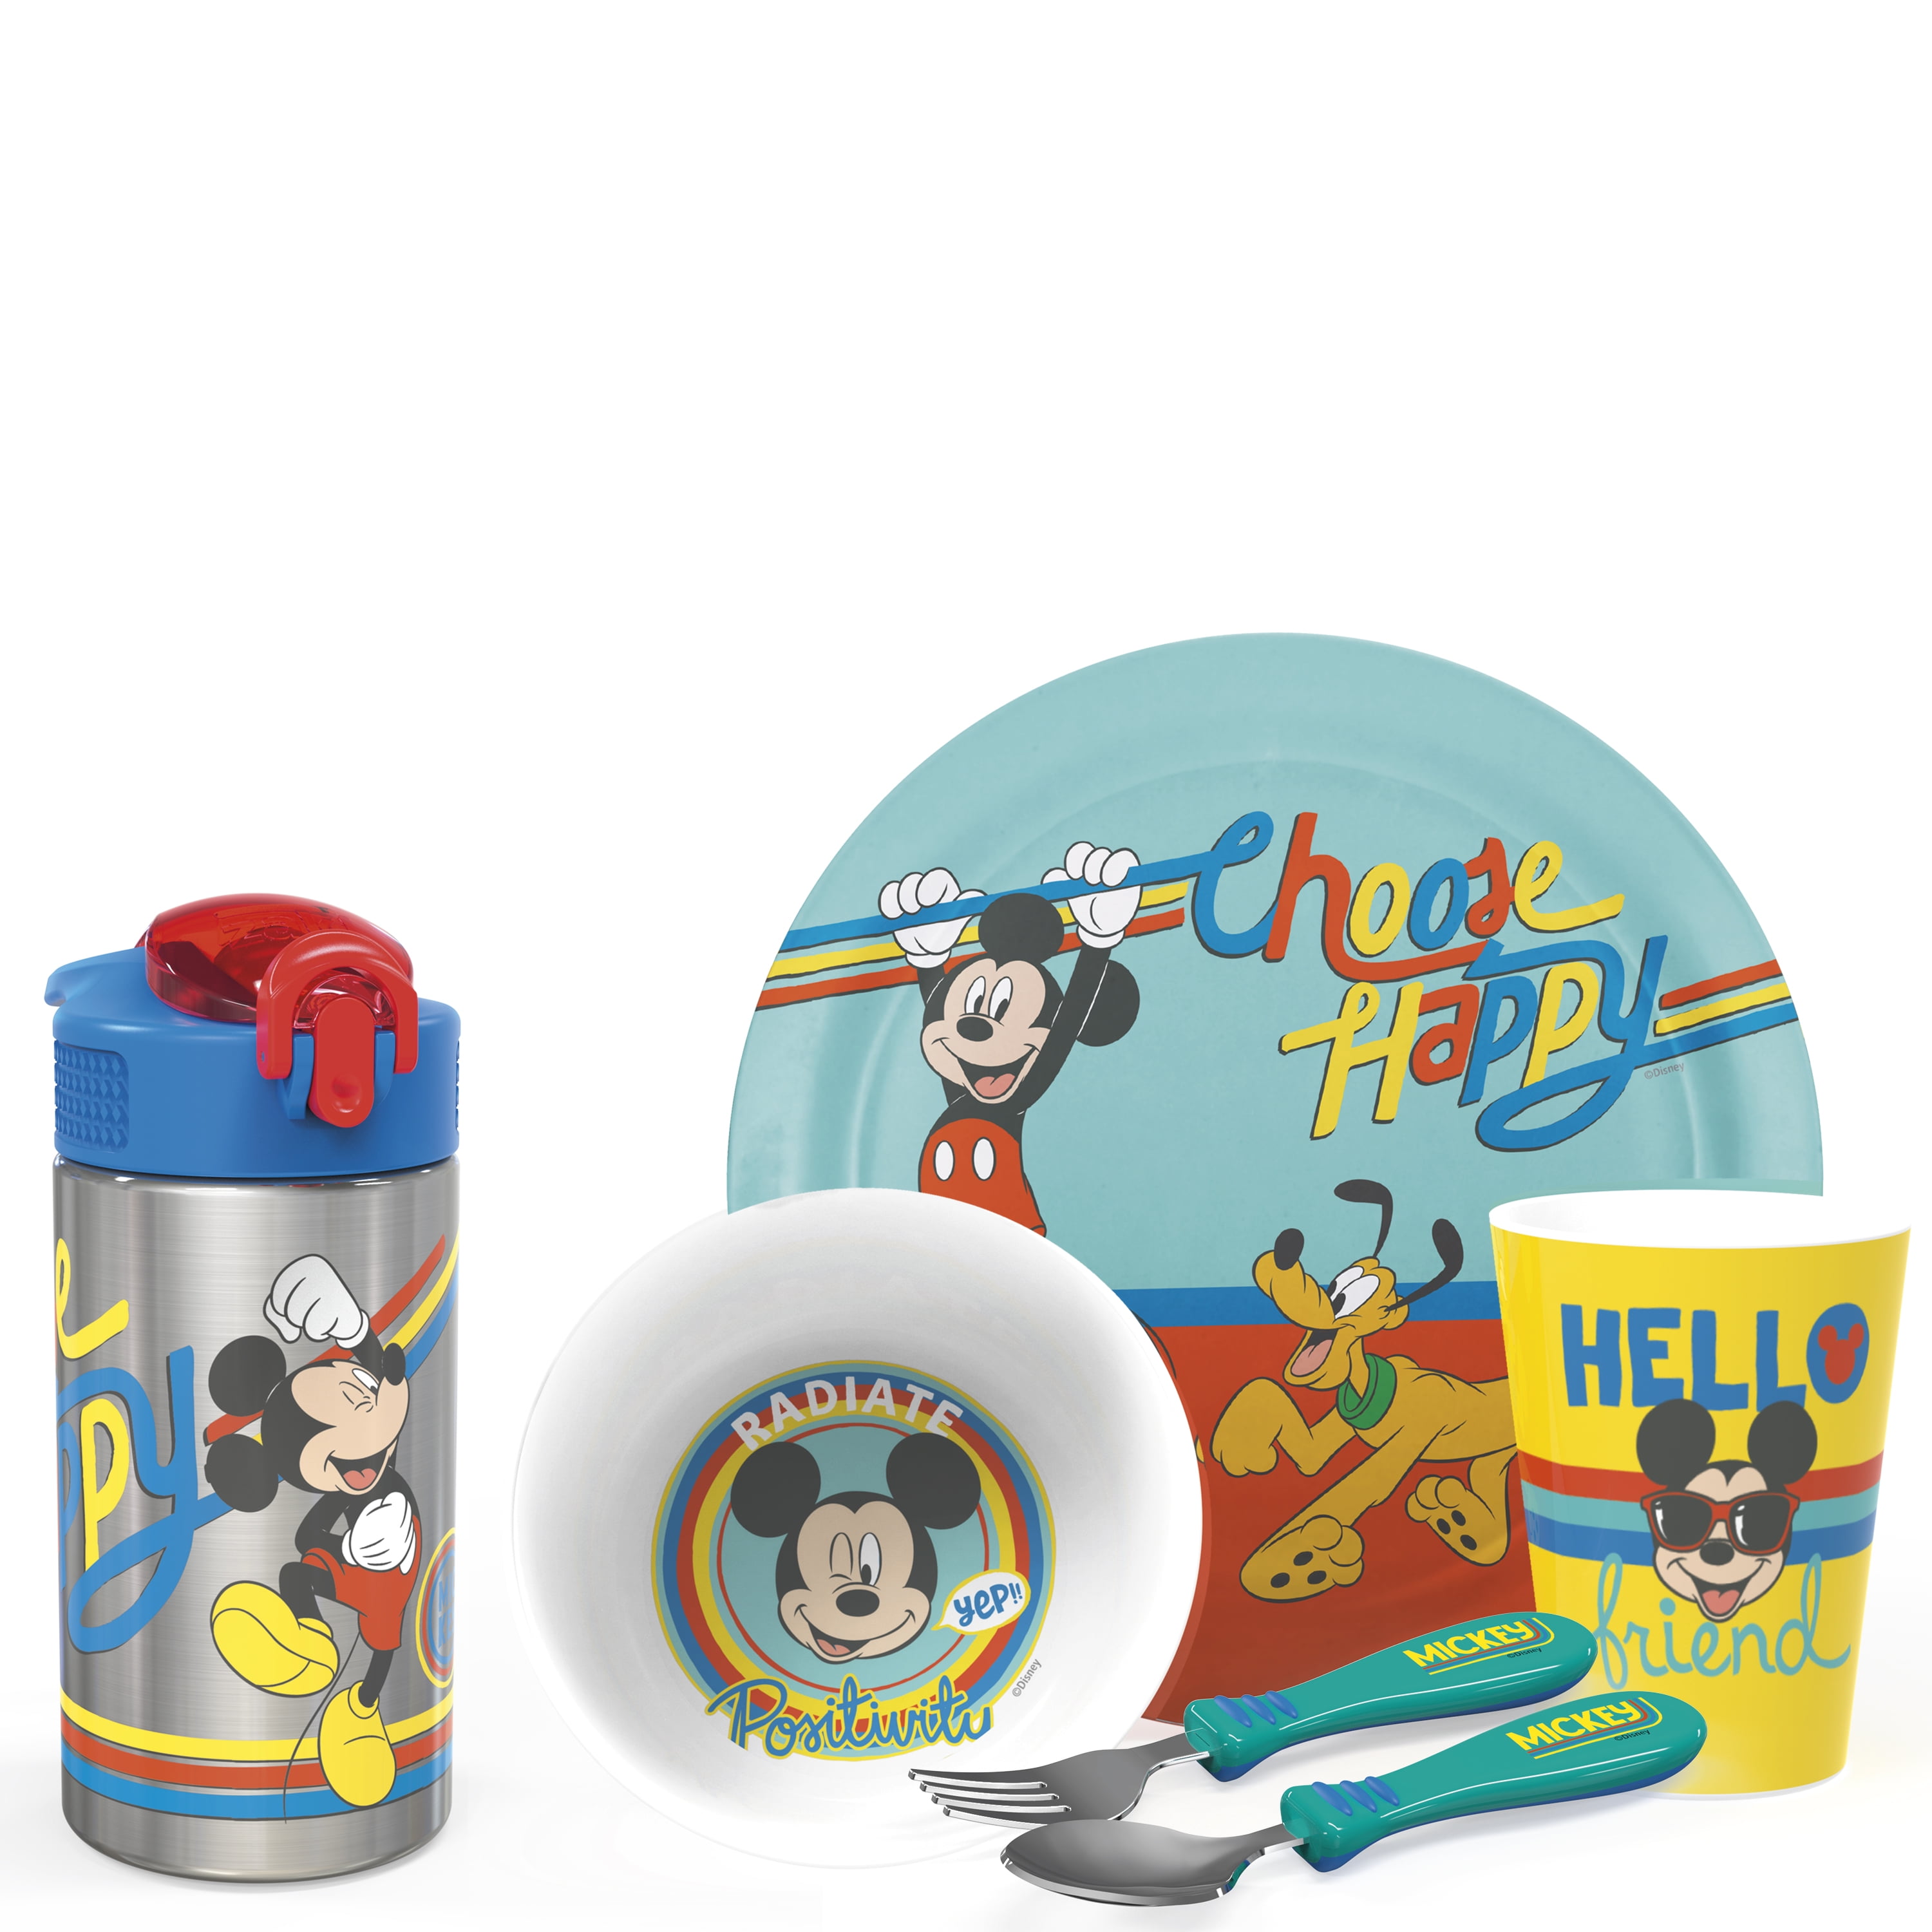 Toy Story Mealtime Dinnerware Set Includes Plate Bowl and Cup by Disney-New! 